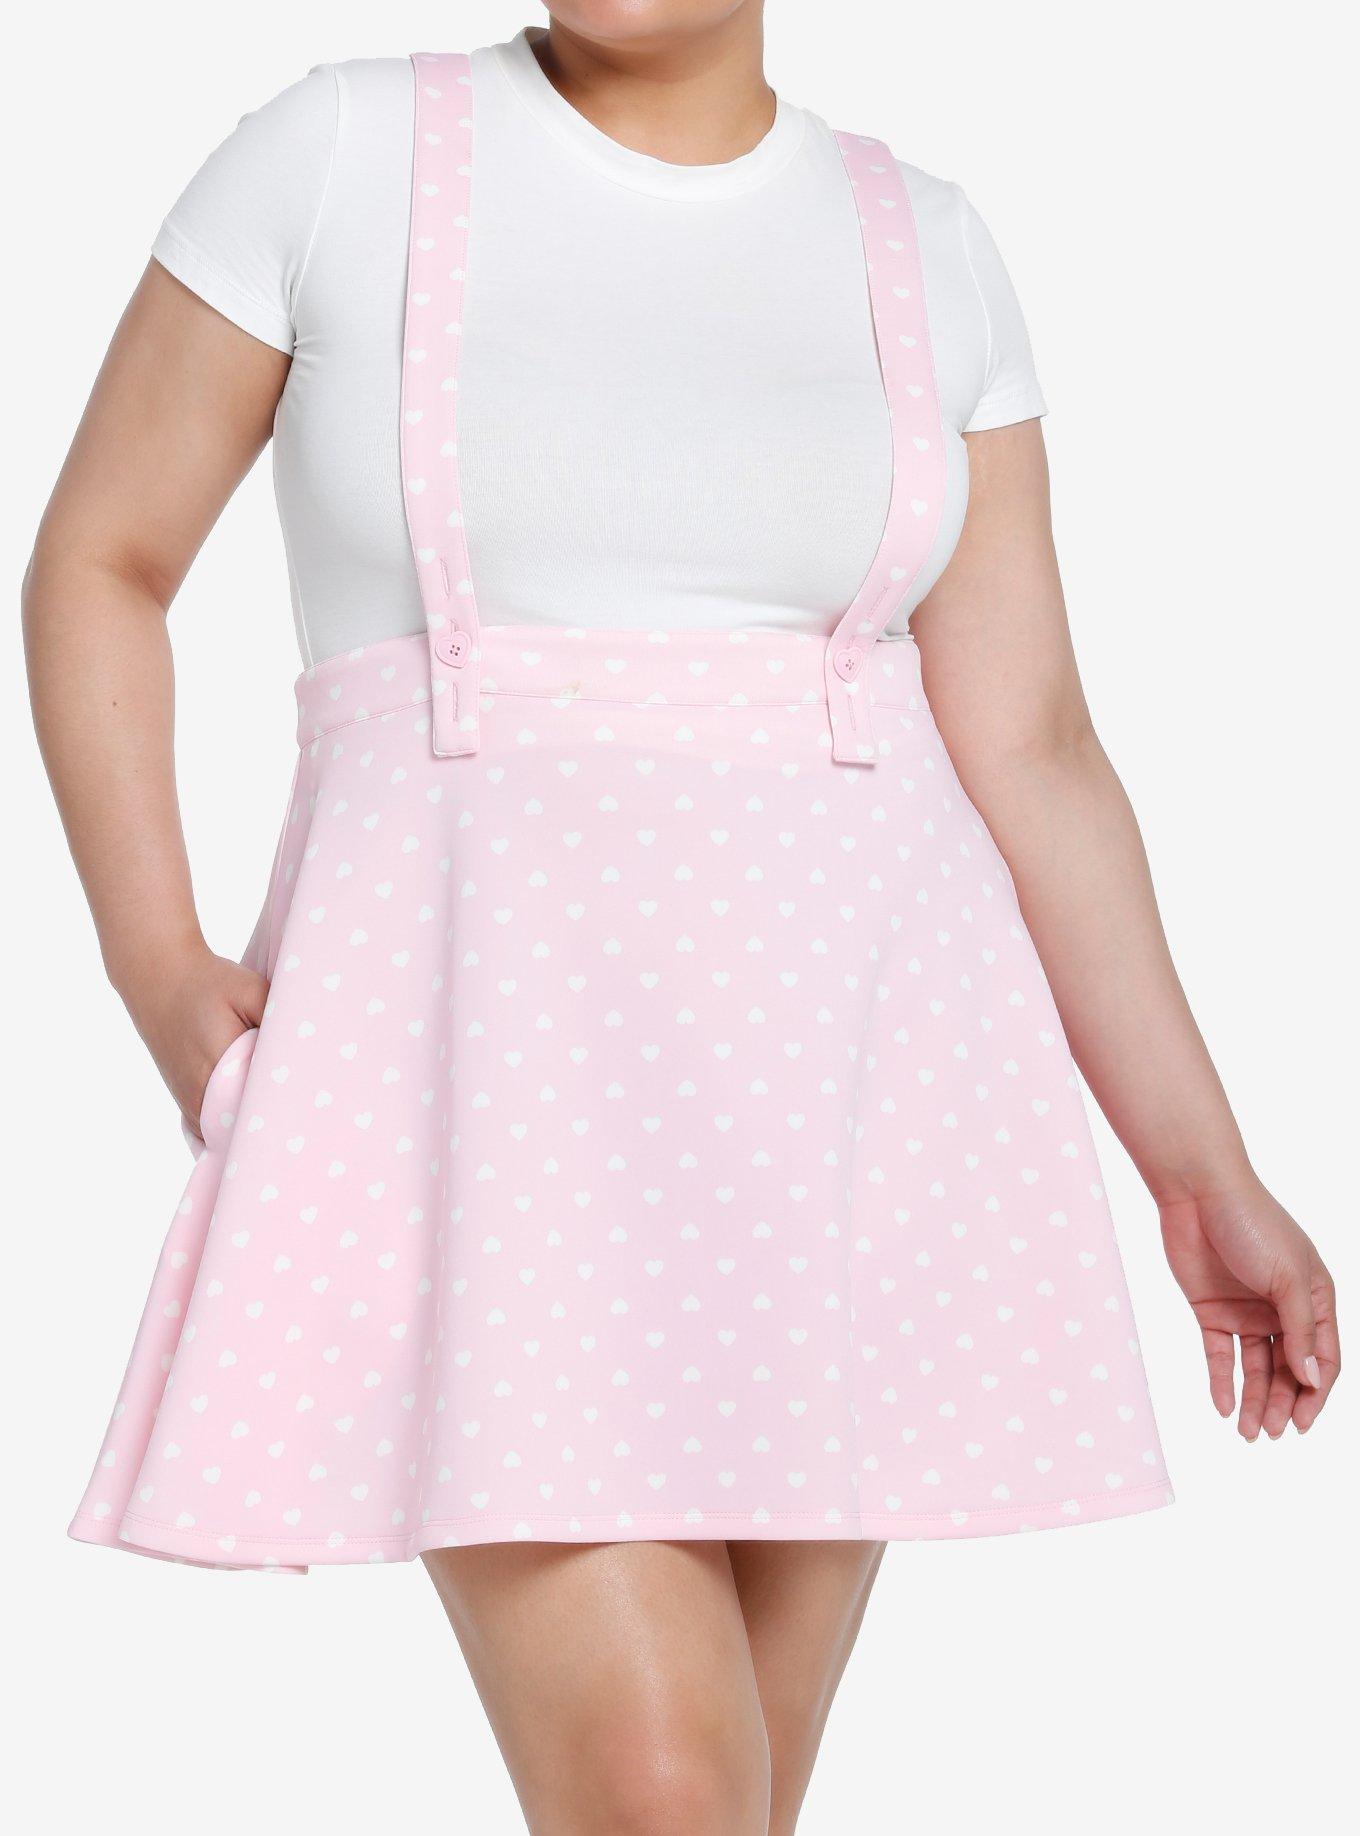 Sweet Society Pink & White Heart Bow Suspender Skirt Plus Size, PINK, hi-res